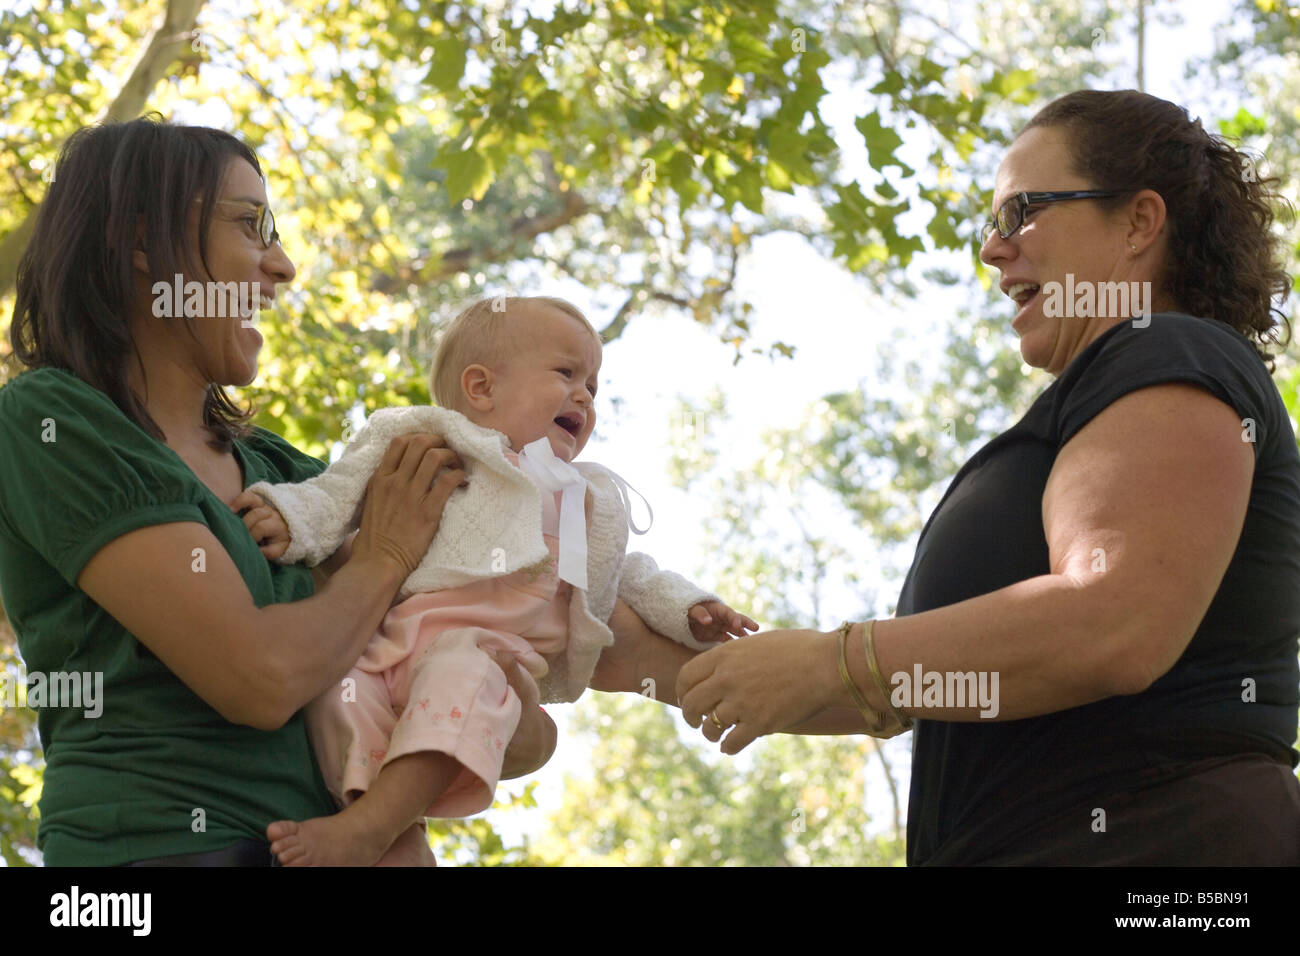 baby girl crying in fear when stranger attempts to hold her, outdoors, southwestern united states Stock Photo